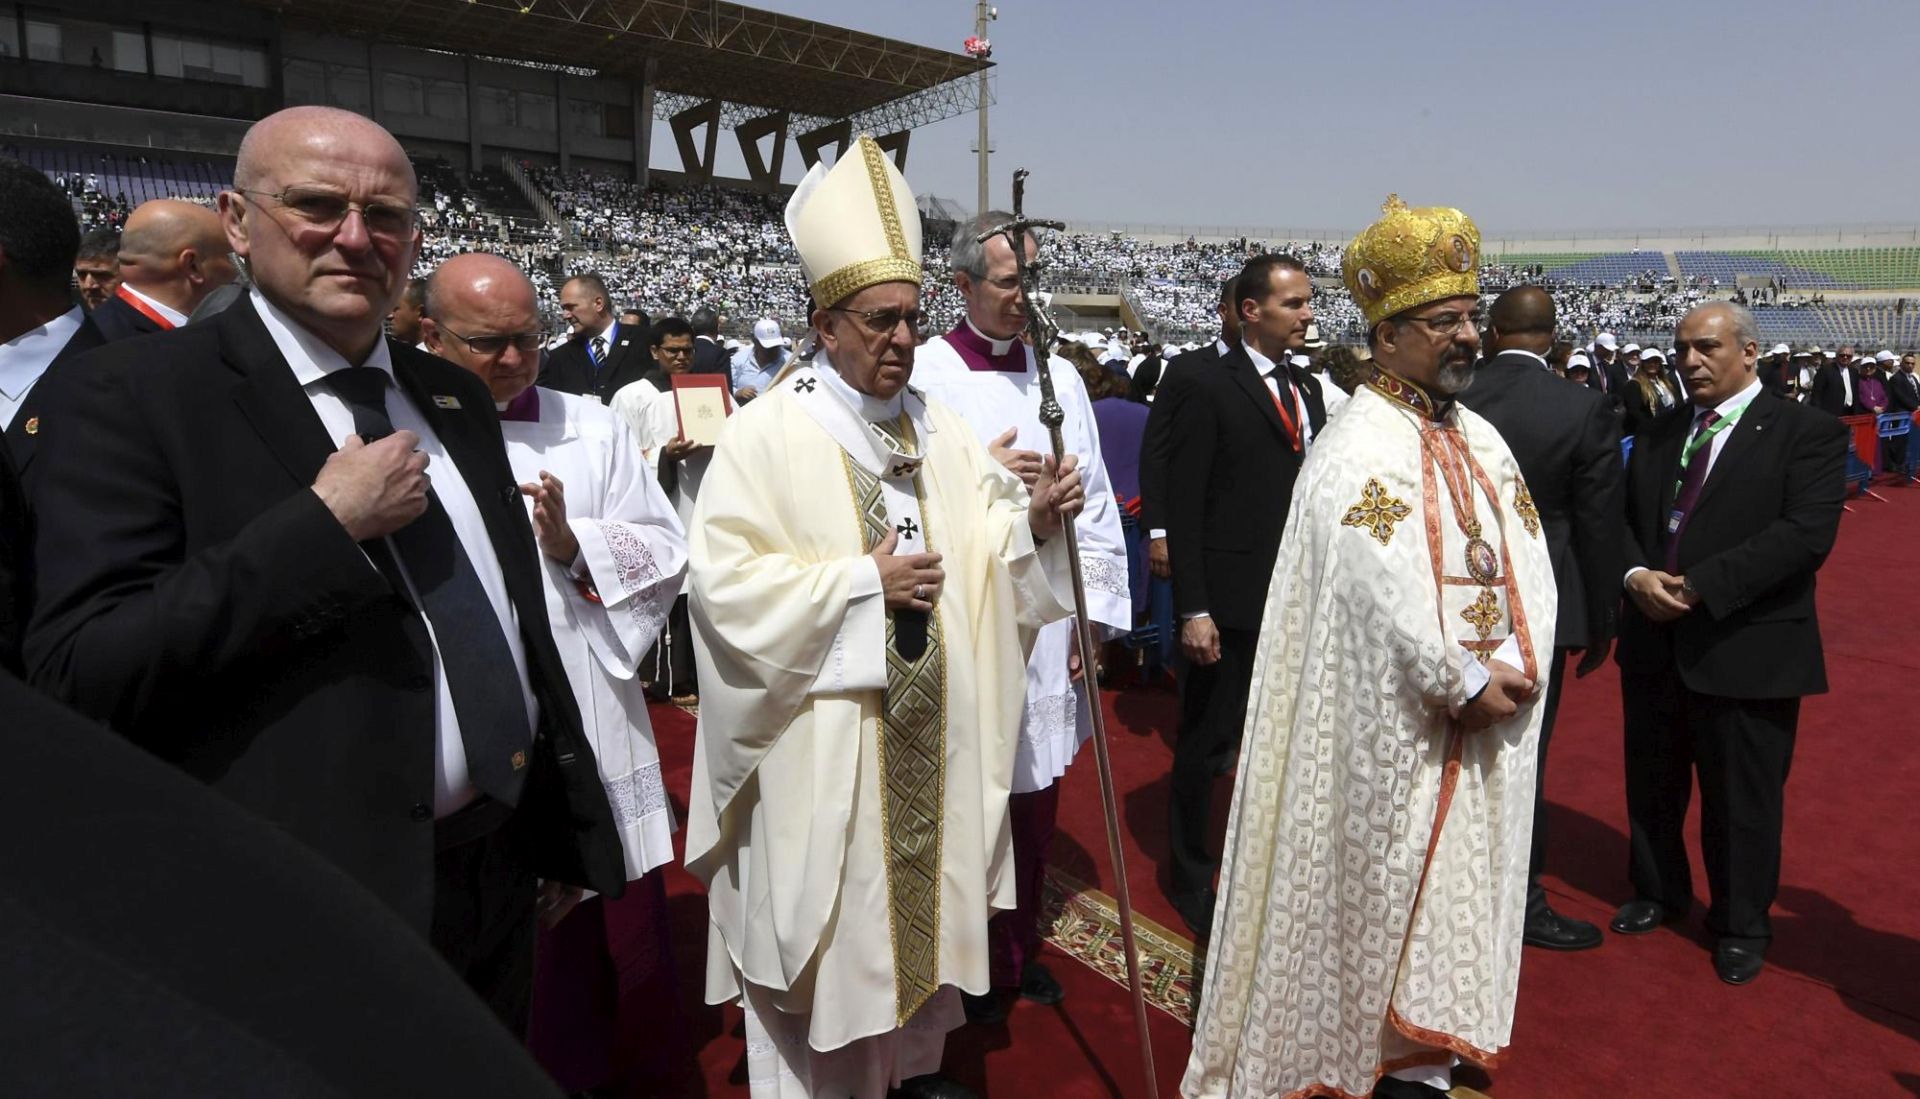 epa05934411 Pope Francis arrives to celebrate Mass for Egypt's Catholic community, at the Air Defense Stadium in Cairo, Egypt, 29 April 2017. Pope Francis is leading a mass in the Air defense stadium attended by 30 thousand people north-east of Cairo on the second day of his two-day visit to Cairo. A day earlier he met with Egyptian President Abdel Fattah al-Sisi, head of the Coptic Orthodox Church Pope Tawadros II, and Grand Imam of al-Azhar Ahmed al-Tayeb. Pope Francis historic visit to the Arab and Muslim majority nation aimed at presenting a united Christian-Muslim front to repudiate violence committed in God's name.  EPA/CIRO FUSCO